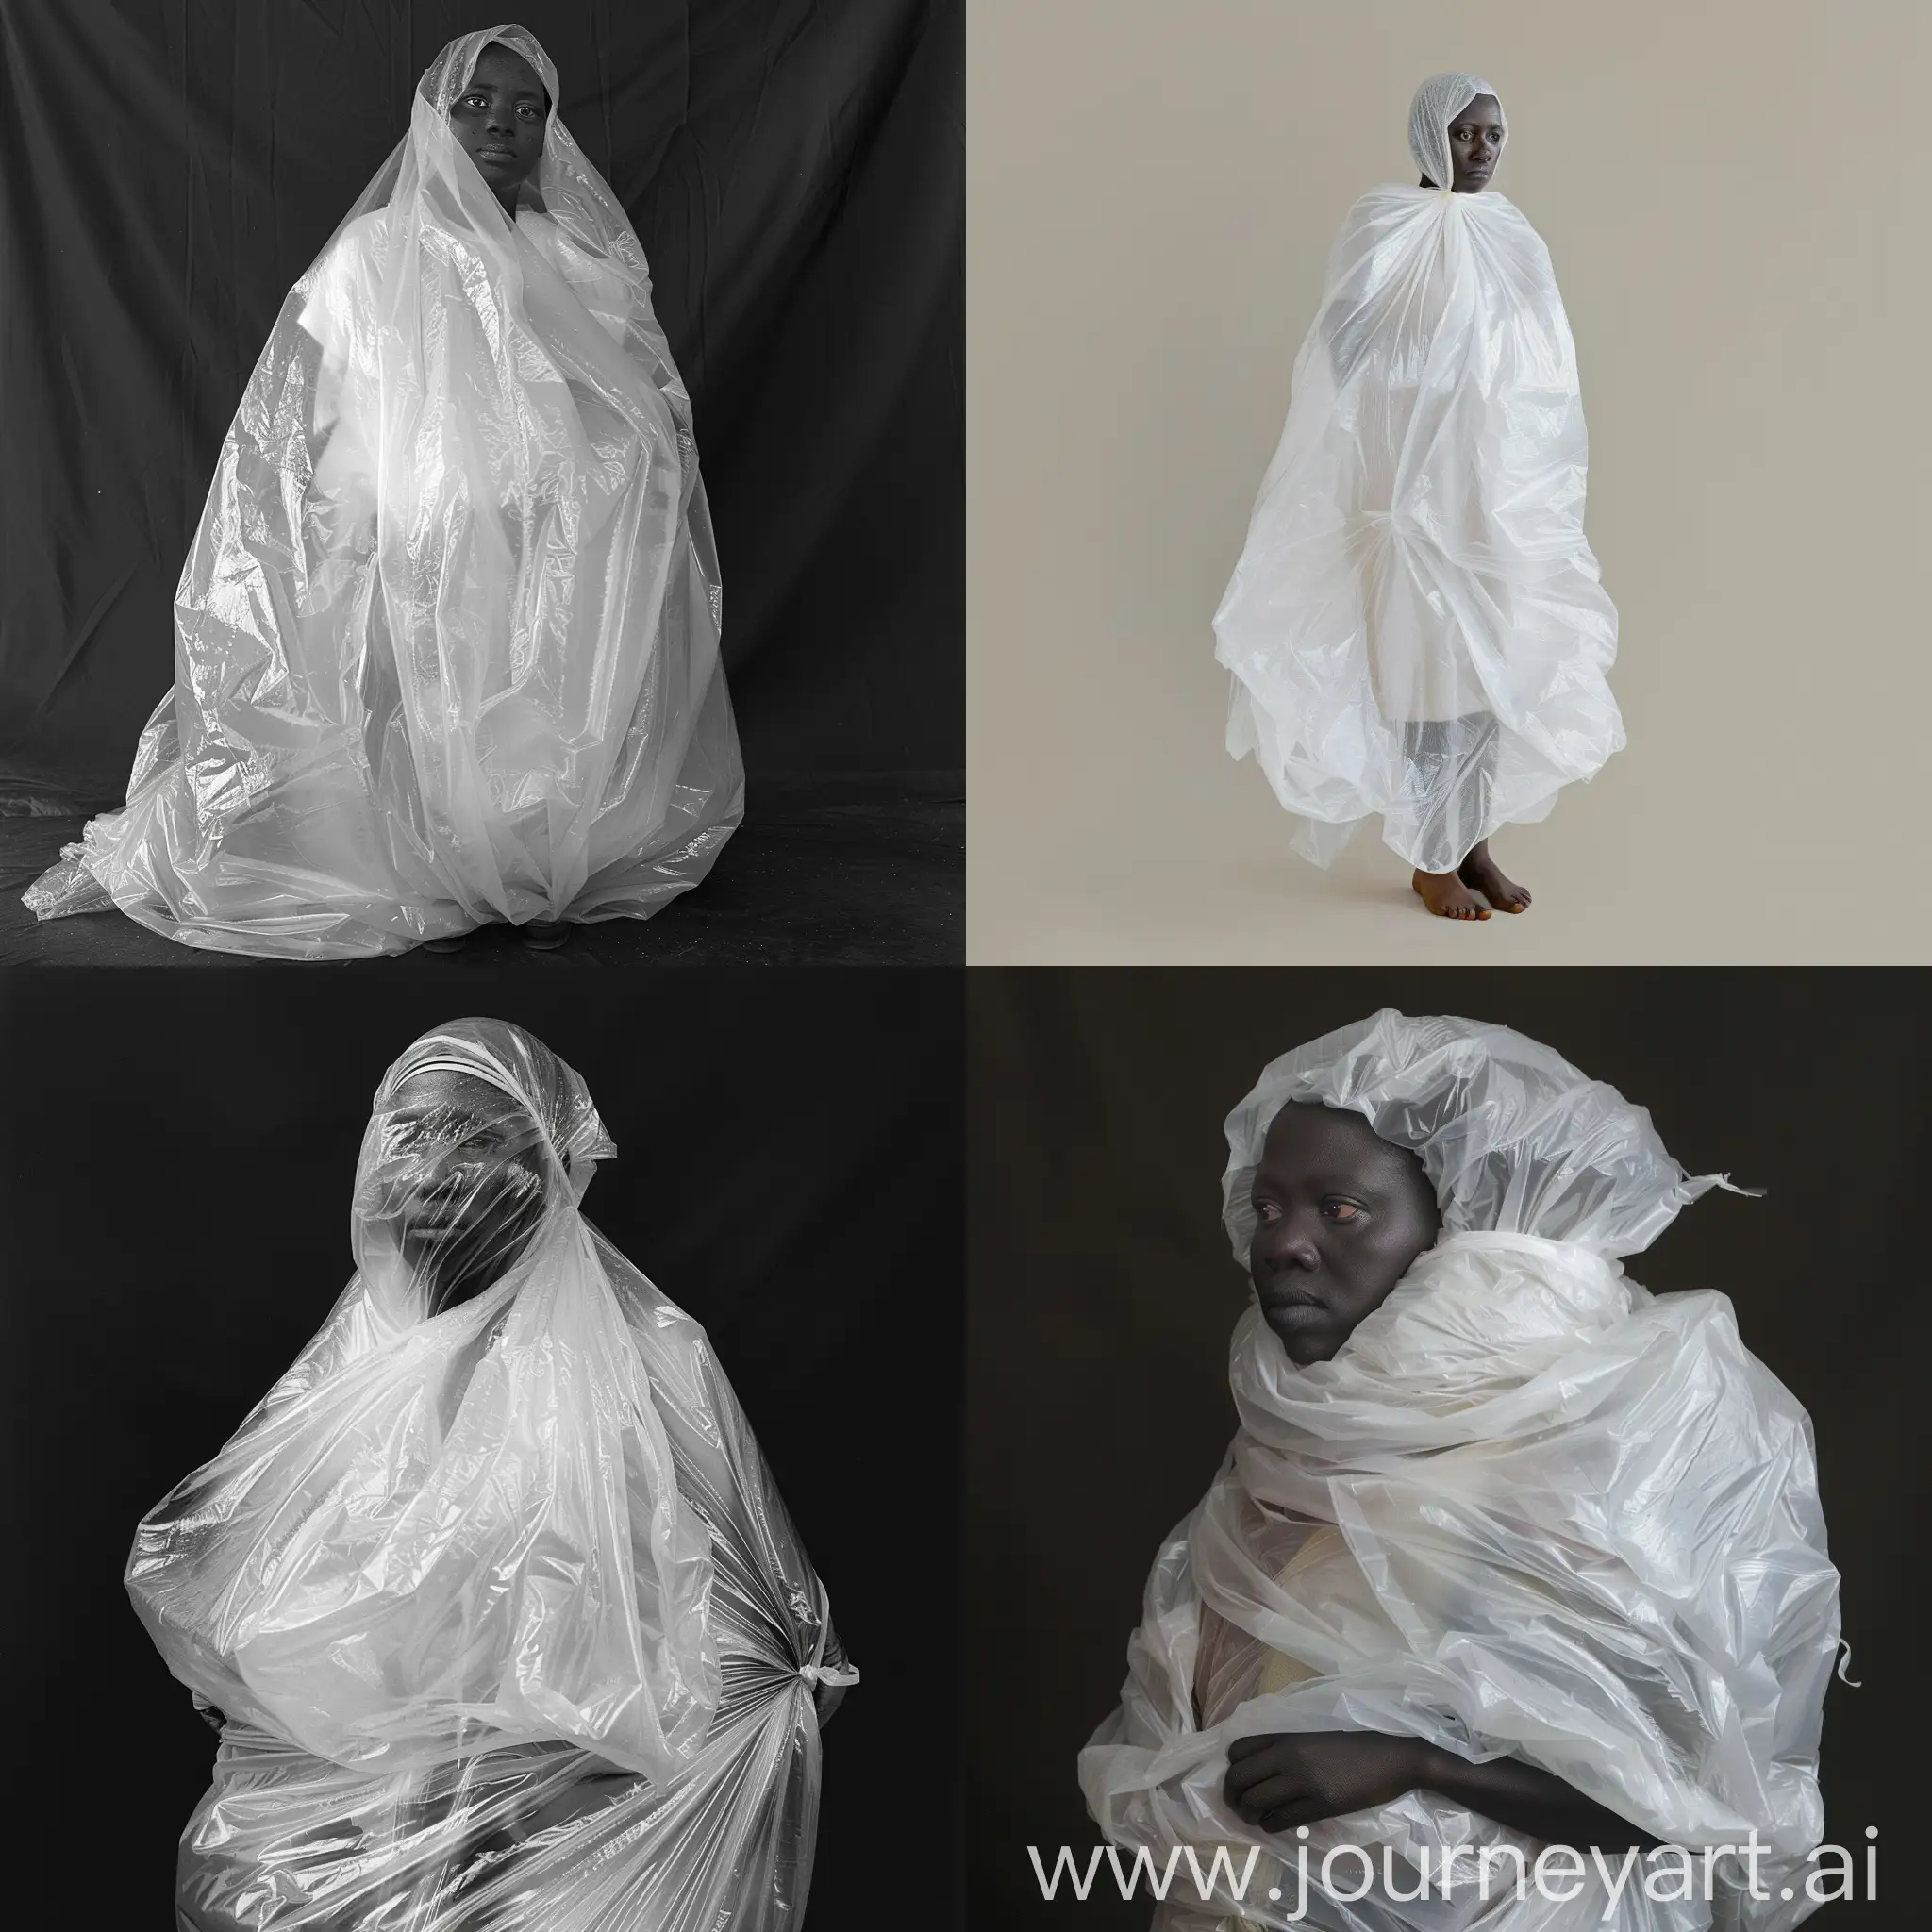 African woman covered in a bulky draped clear plastic bag like a puffy dress